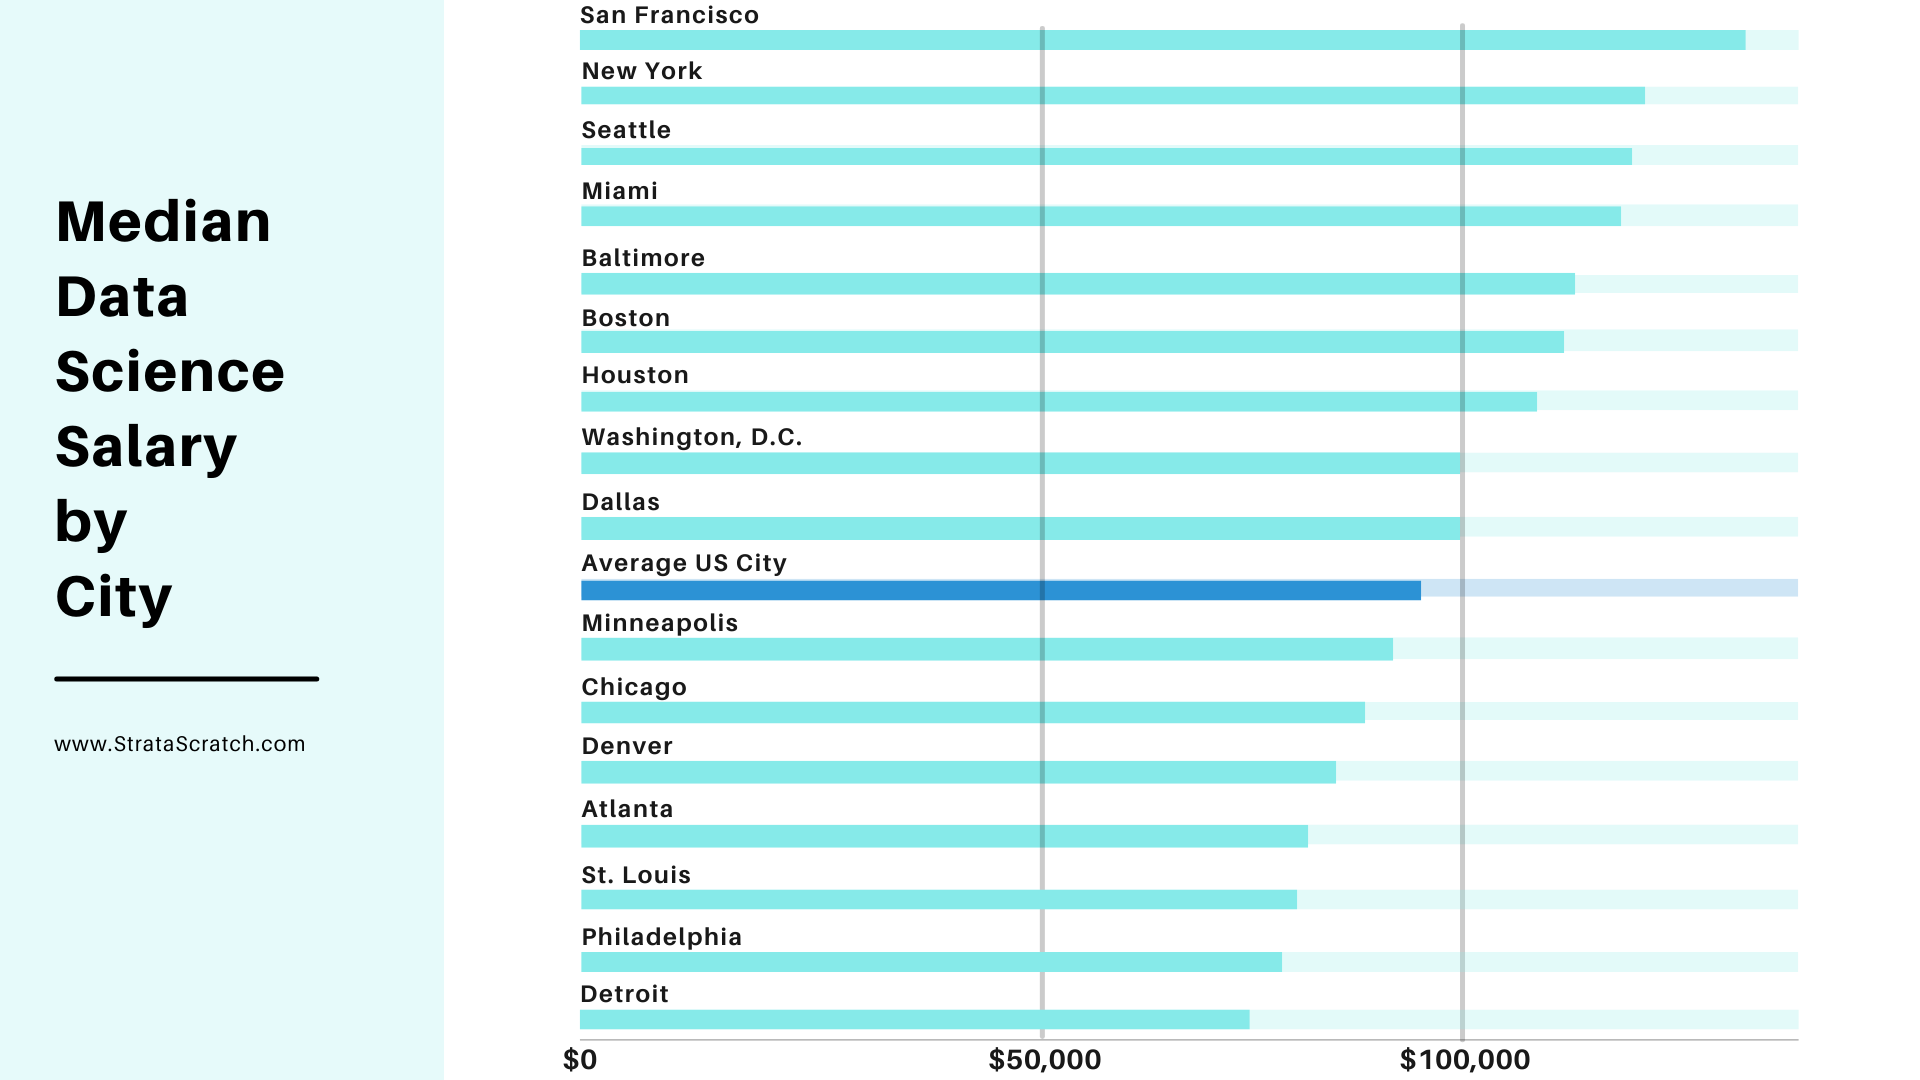 Median Data Science Salary by City